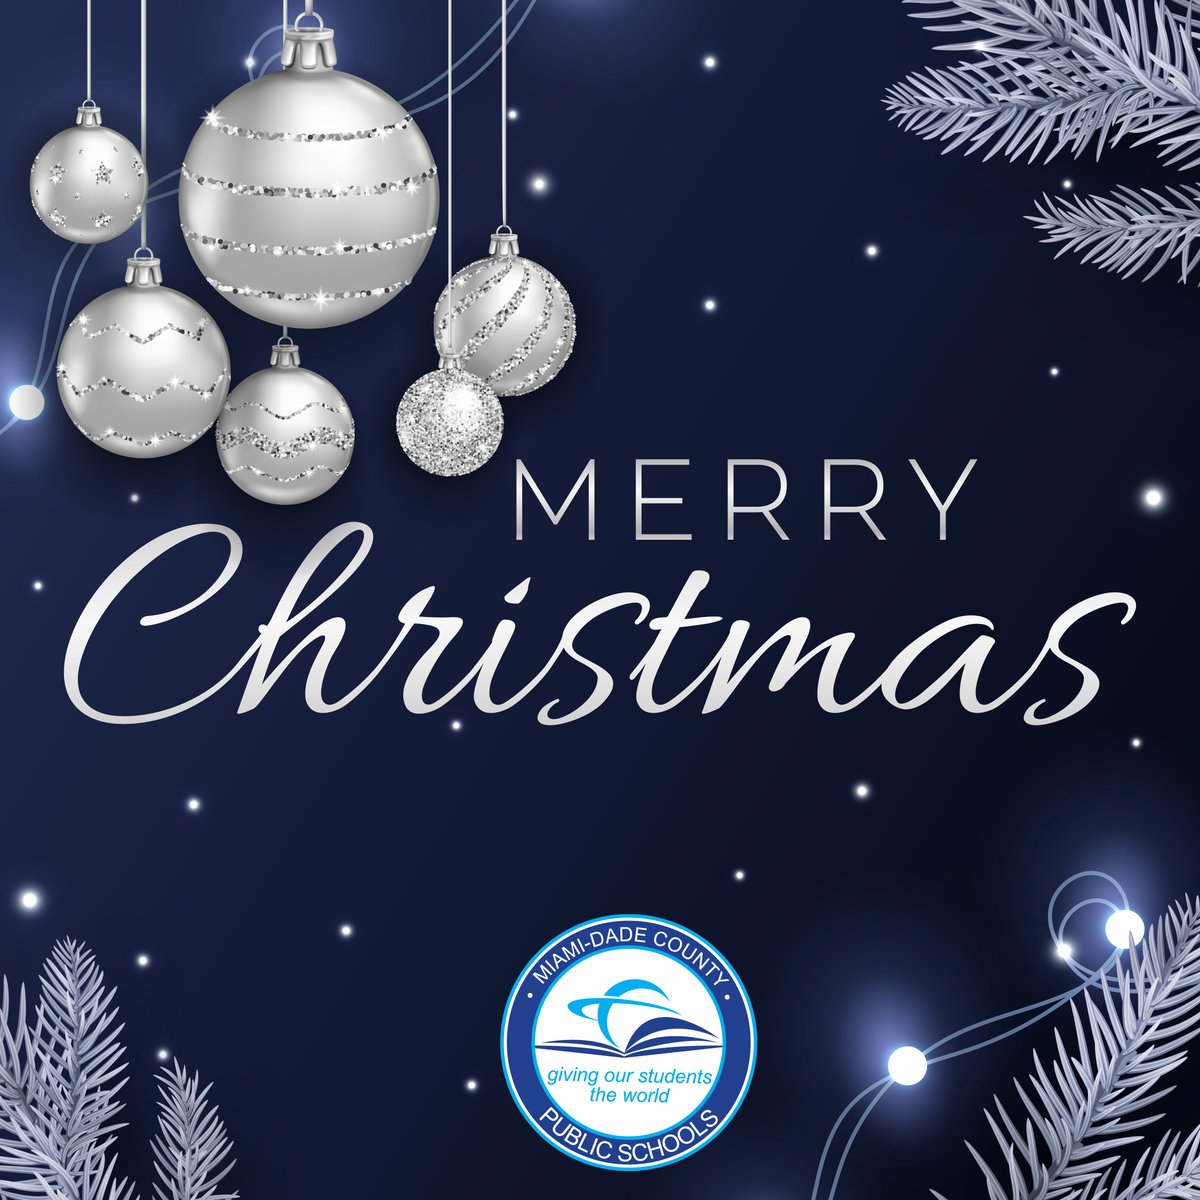 Wishing you a joyous #Christmas Day surrounded by loved ones! Spread the festive cheer, and may all students and families have a safe and merry celebration. Happy Holidays!